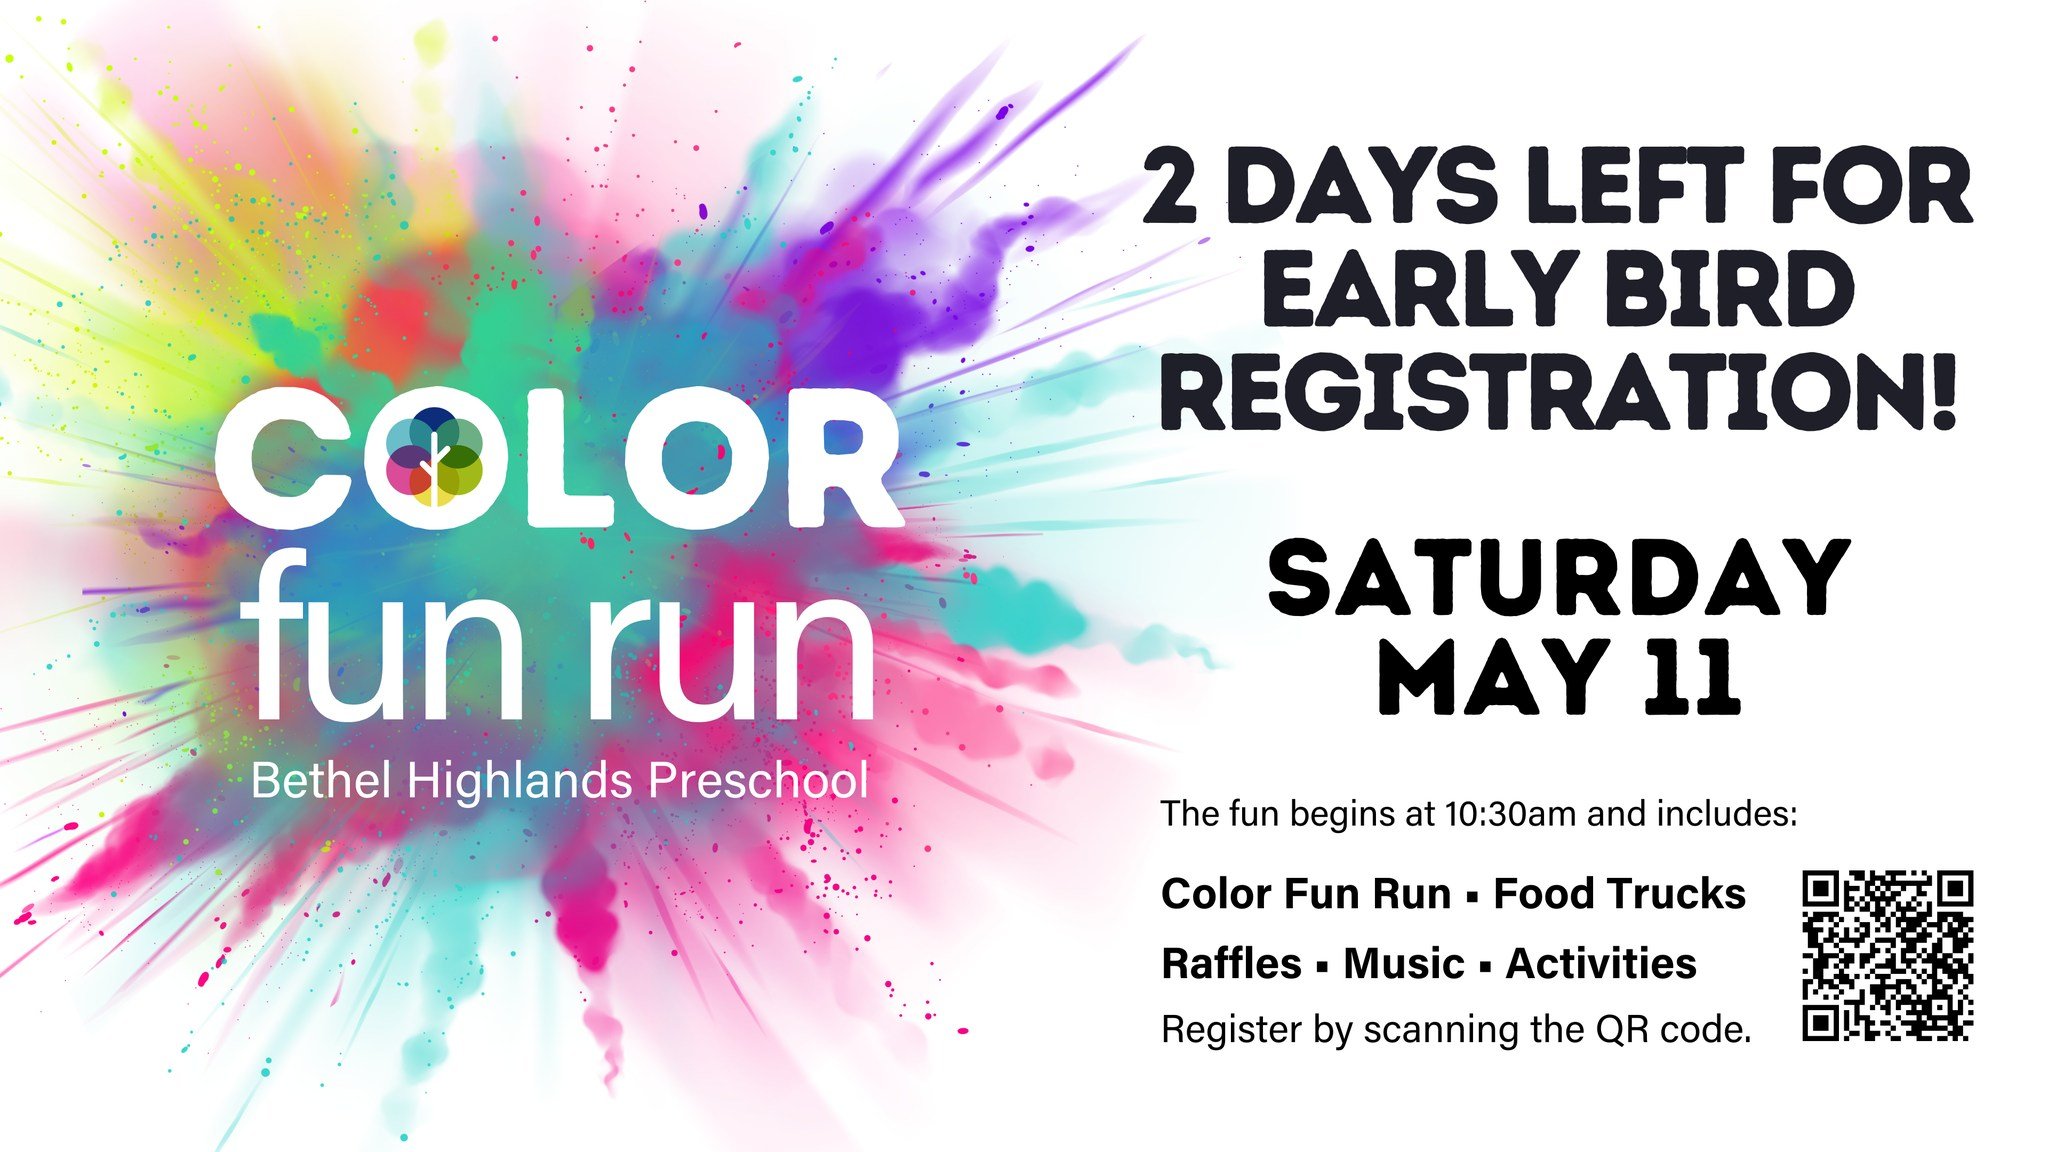 Only two days left to take advantage of our early bird price. 
Register at https://www.bhphudson.org/color-fun-run-registration